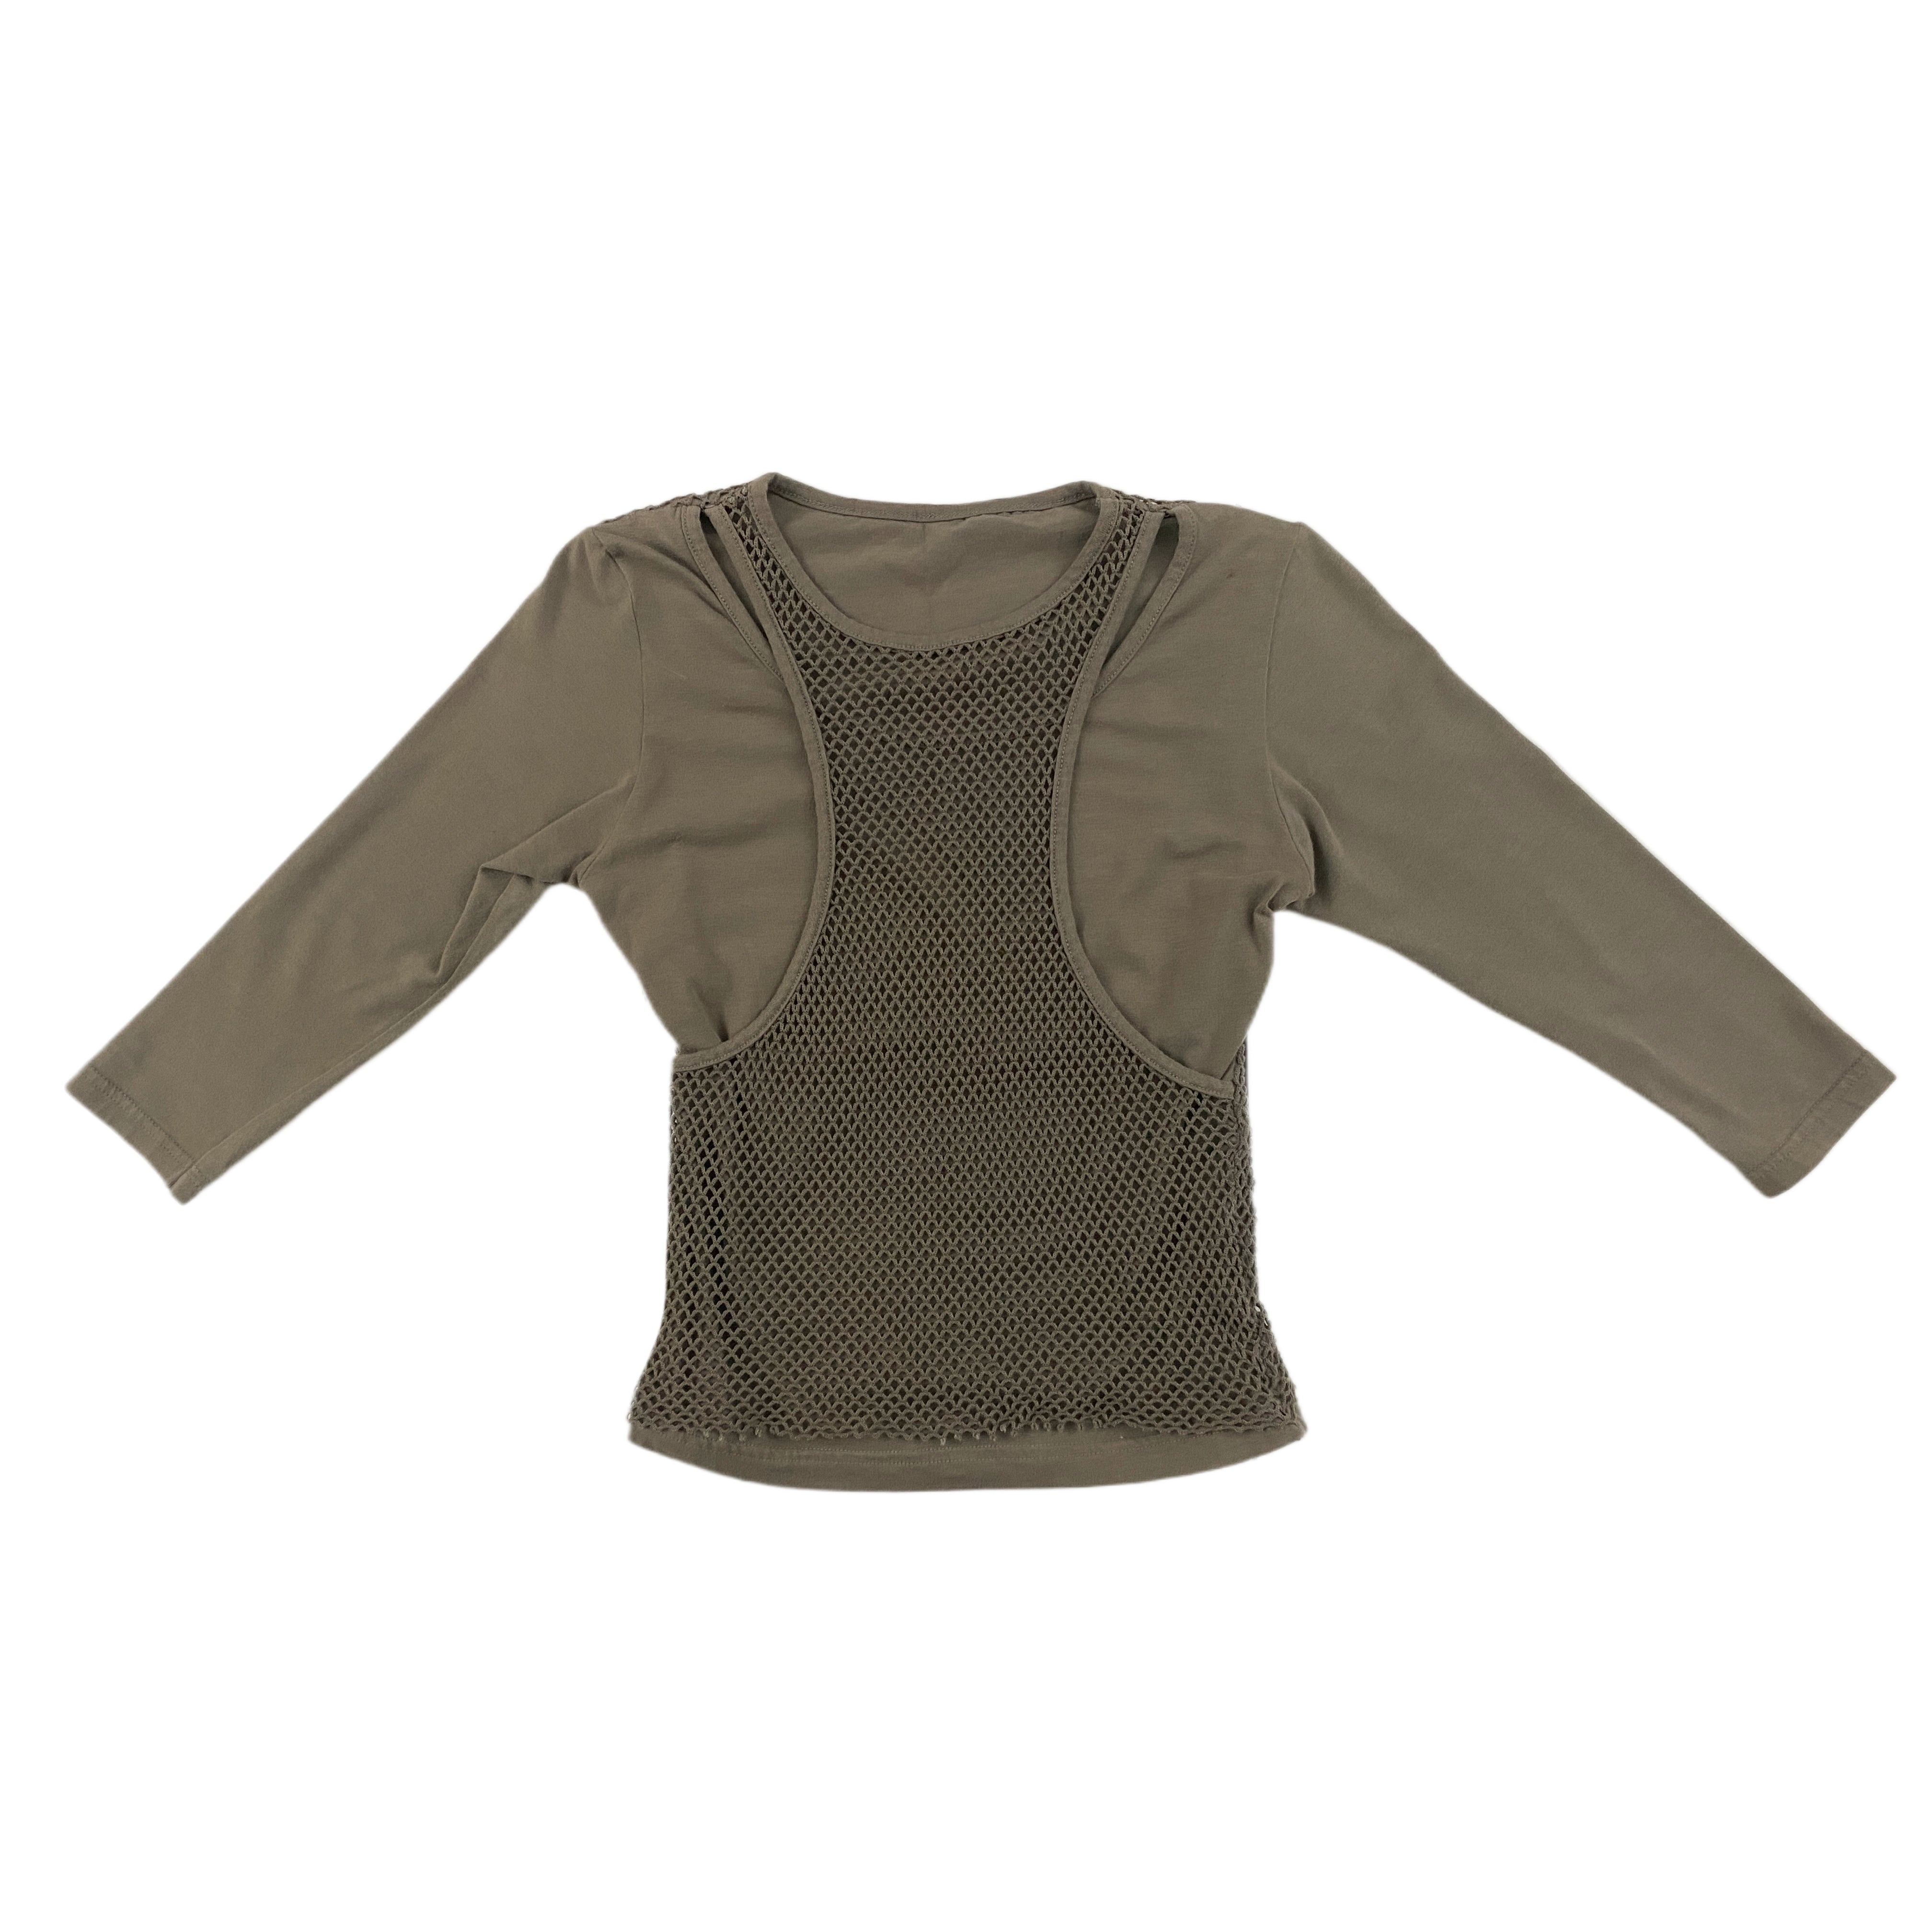 Olive Netted Layered Top (XS)